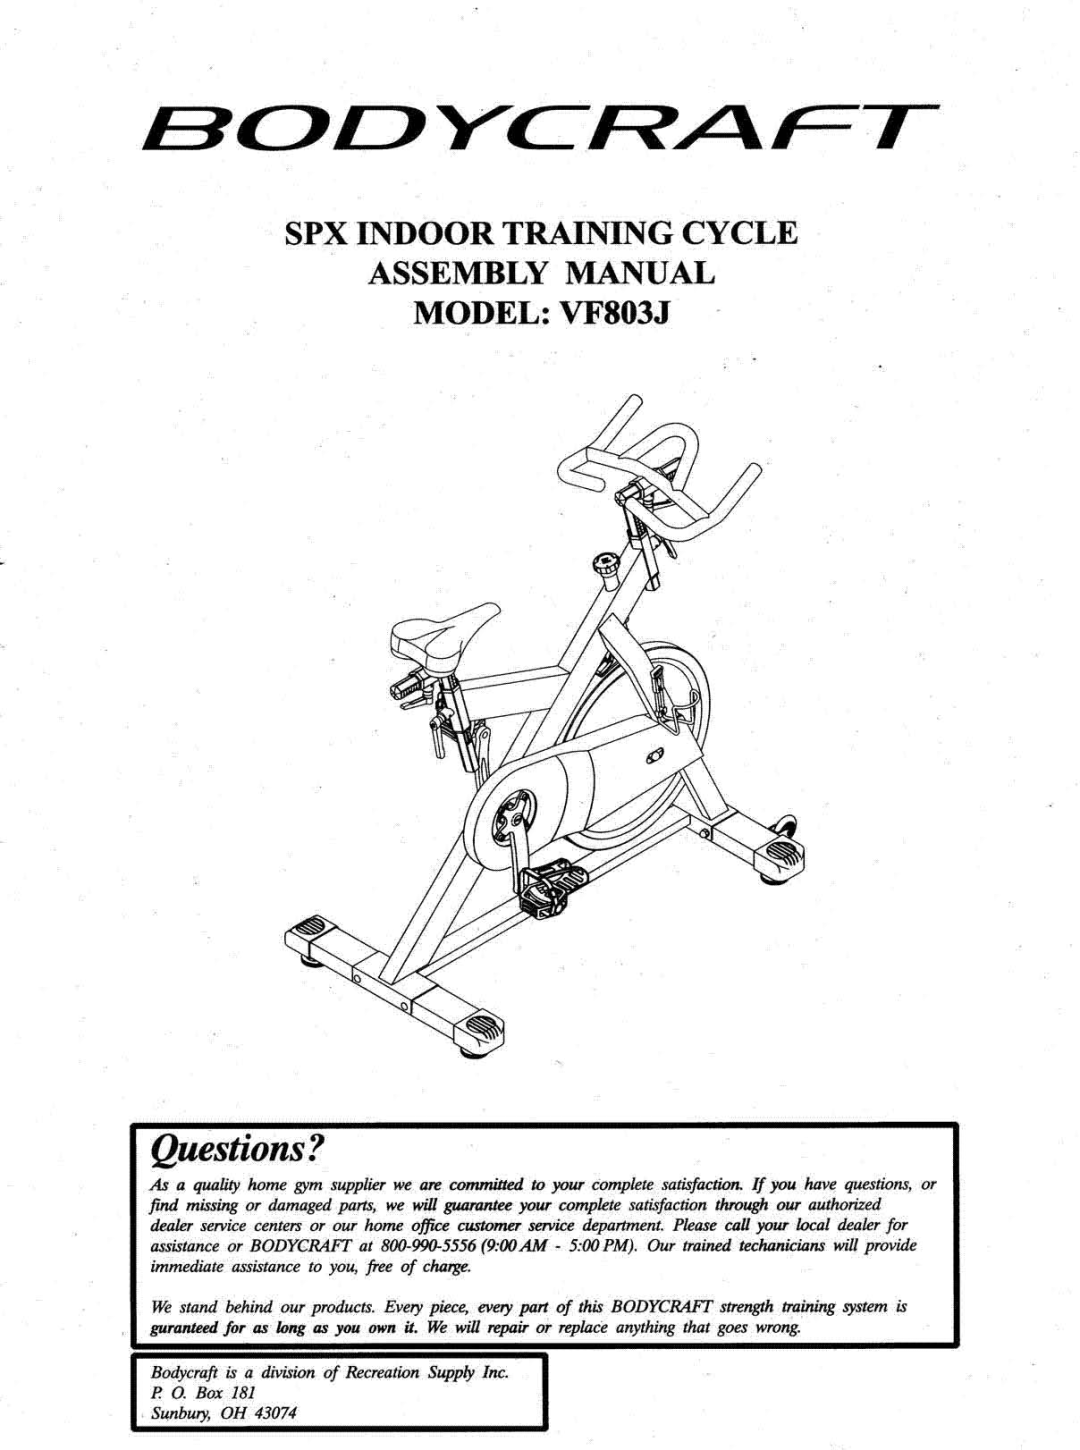 BodyCraft manual Questions?, SPX INDOOR TRAINING CYCLE ASSEMBLY MANUAL MODEL VF803J, p. 0. Box lSI S/#Ibwy, OH 